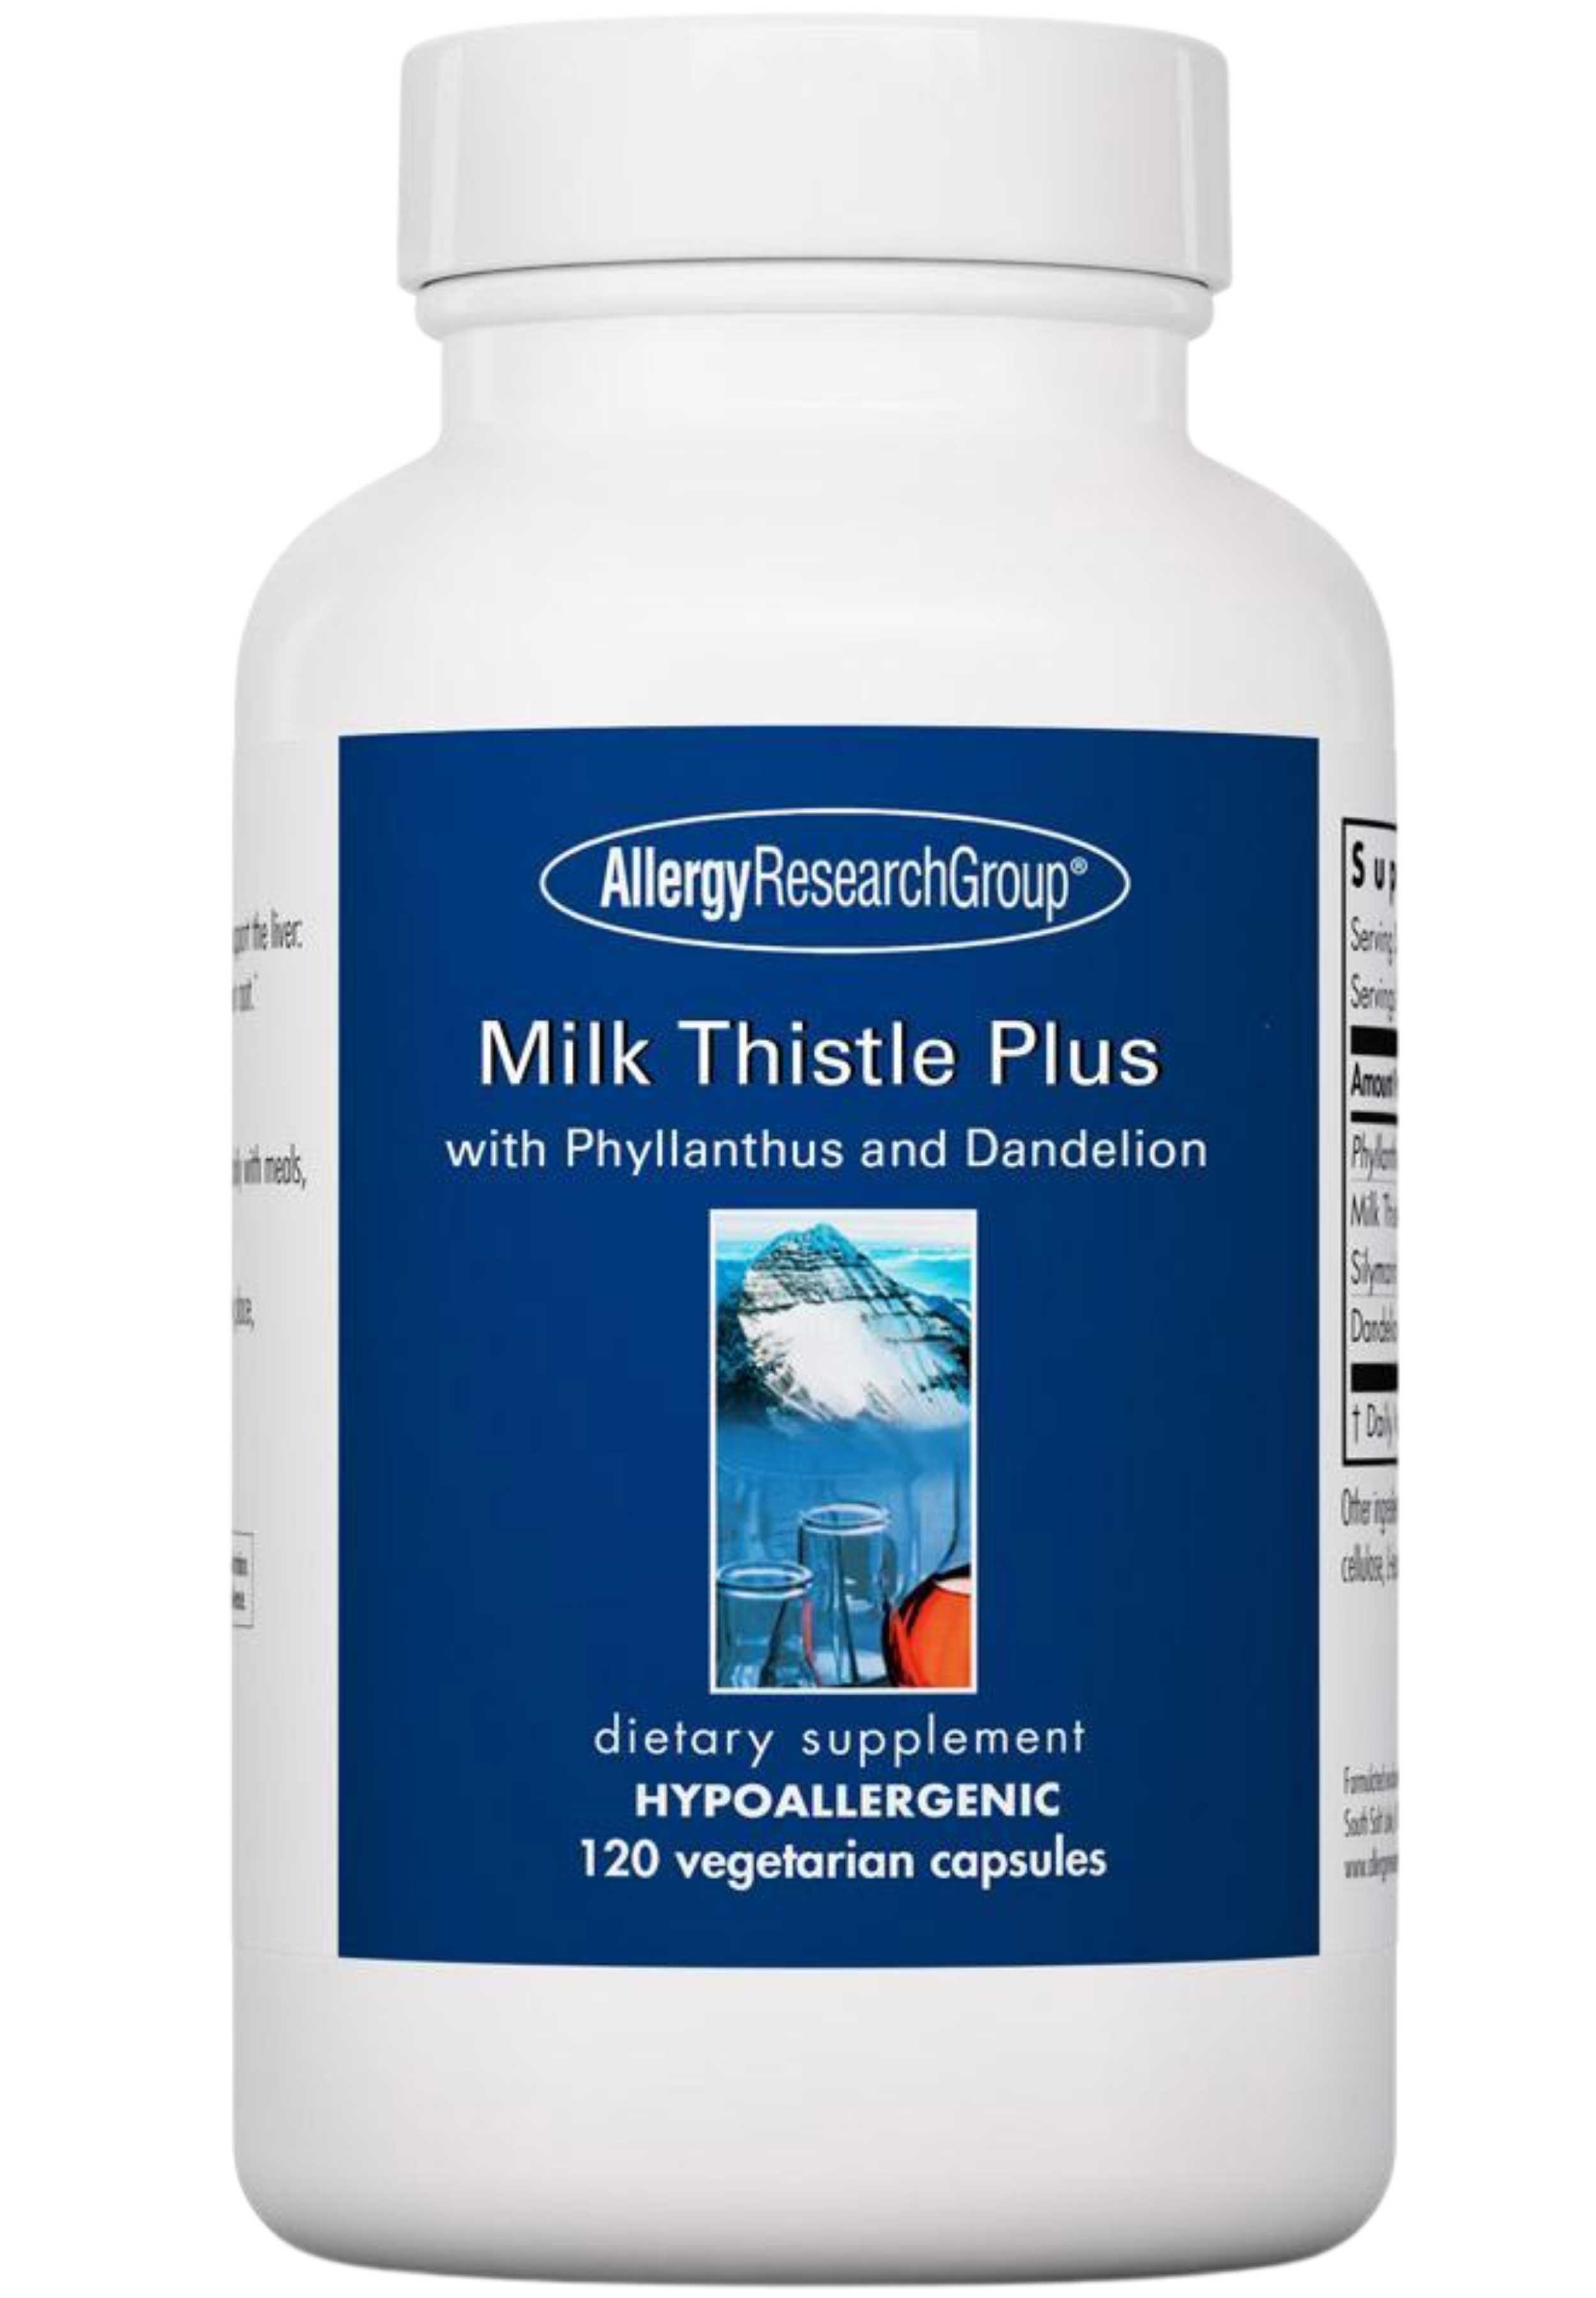 Allergy Research Group Milk Thistle Plus